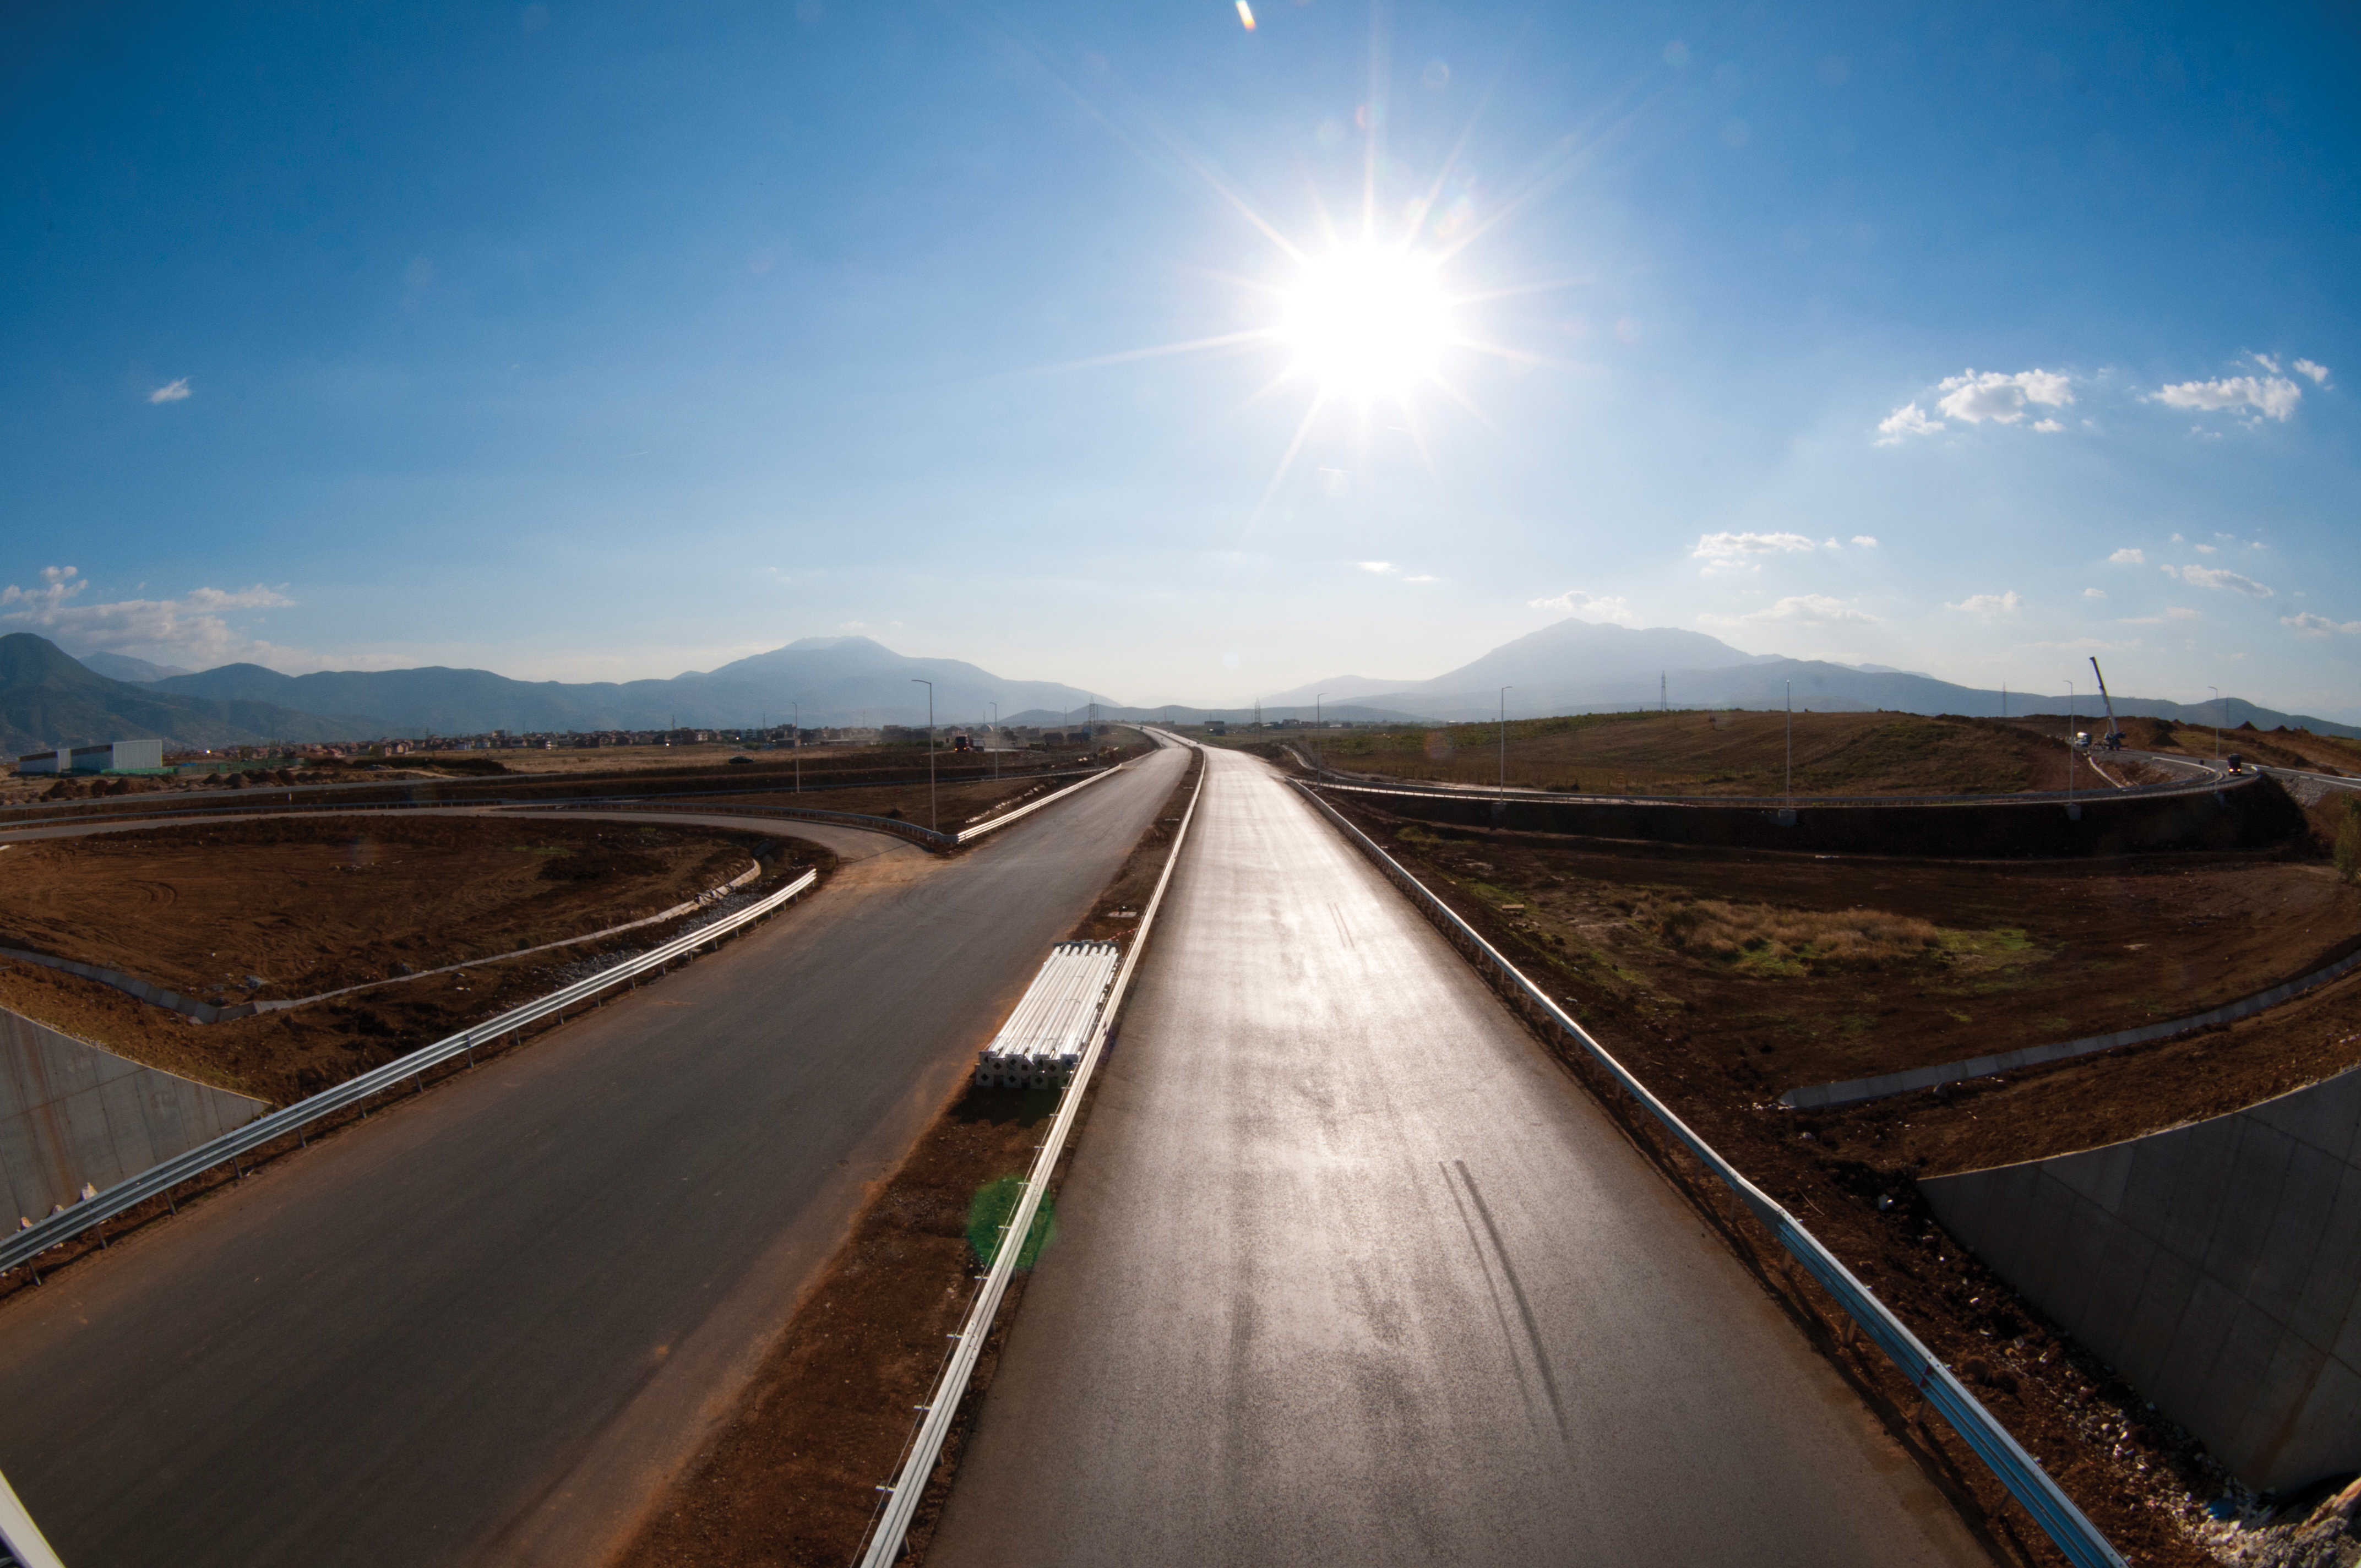 The new highway offers a massive improvement